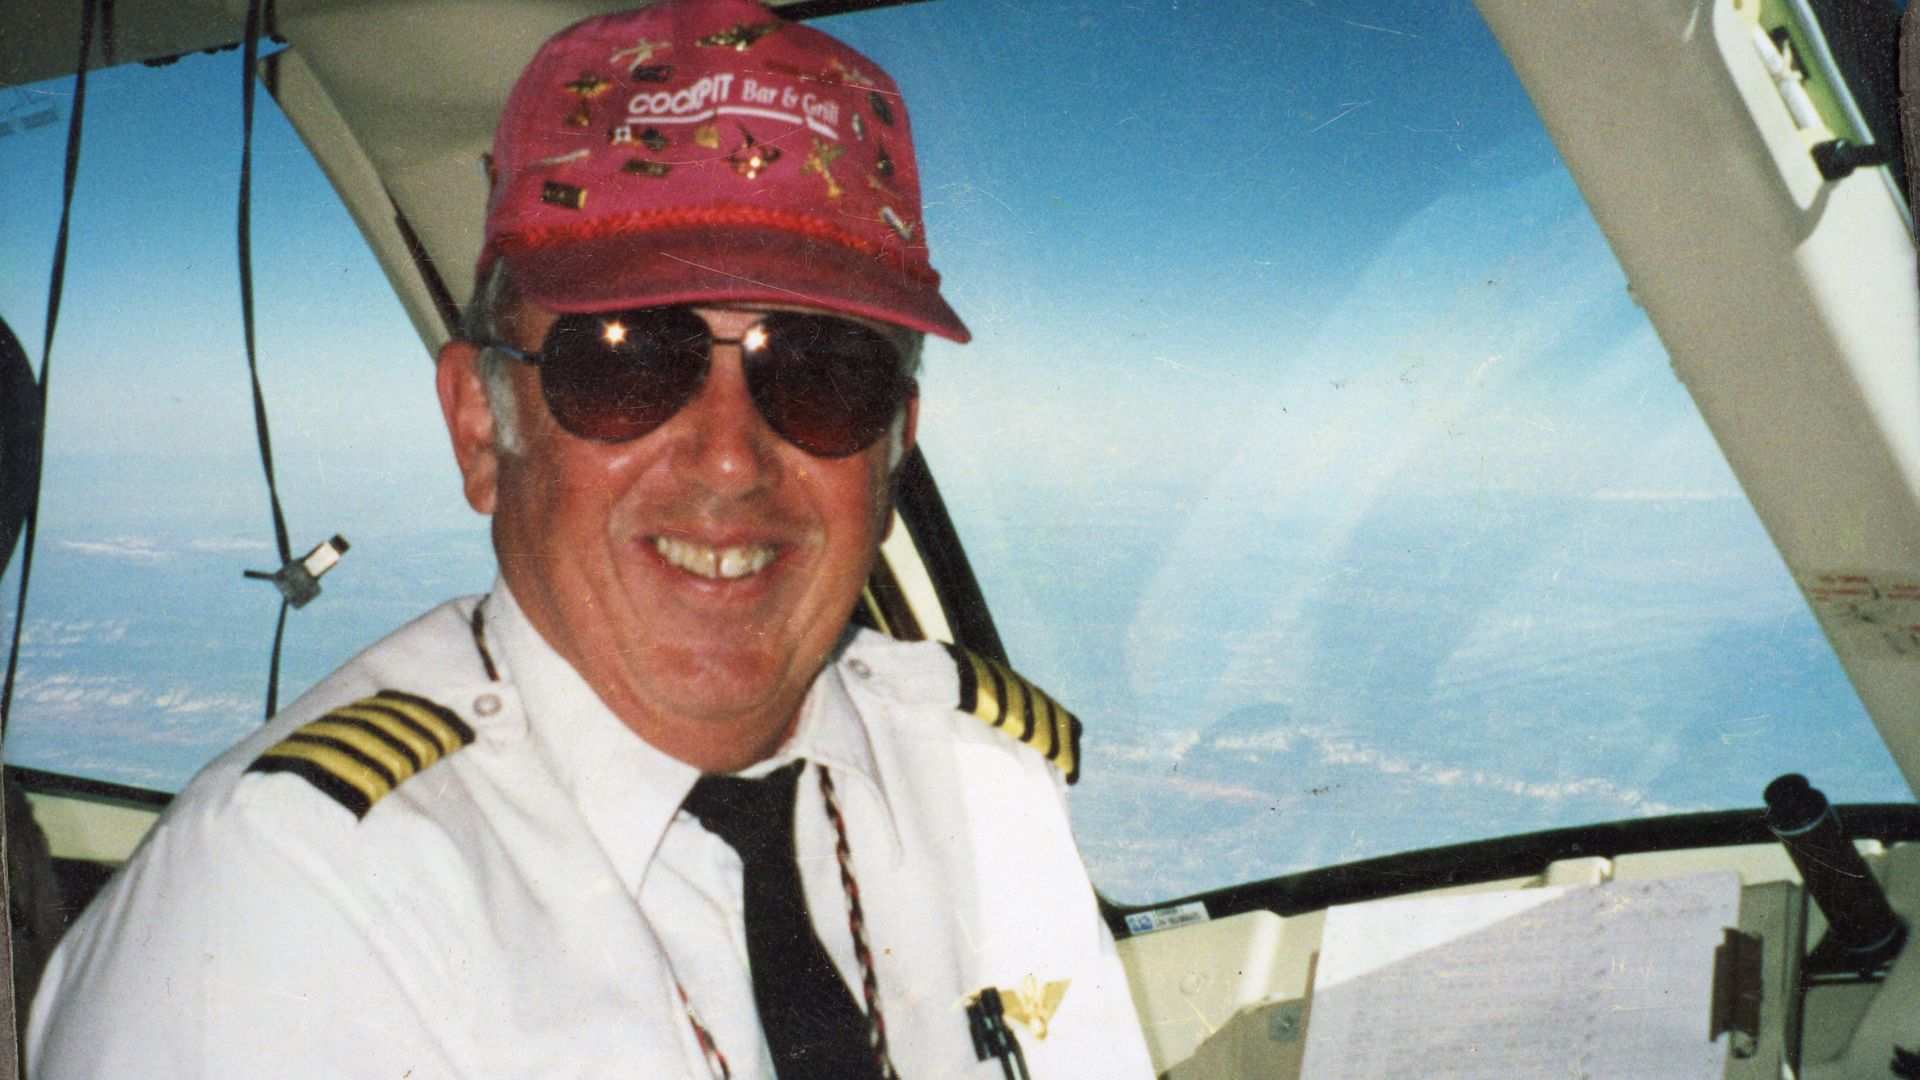 A smiling man in a cockpit, wearing a pilot's uniform and a red baseball cap